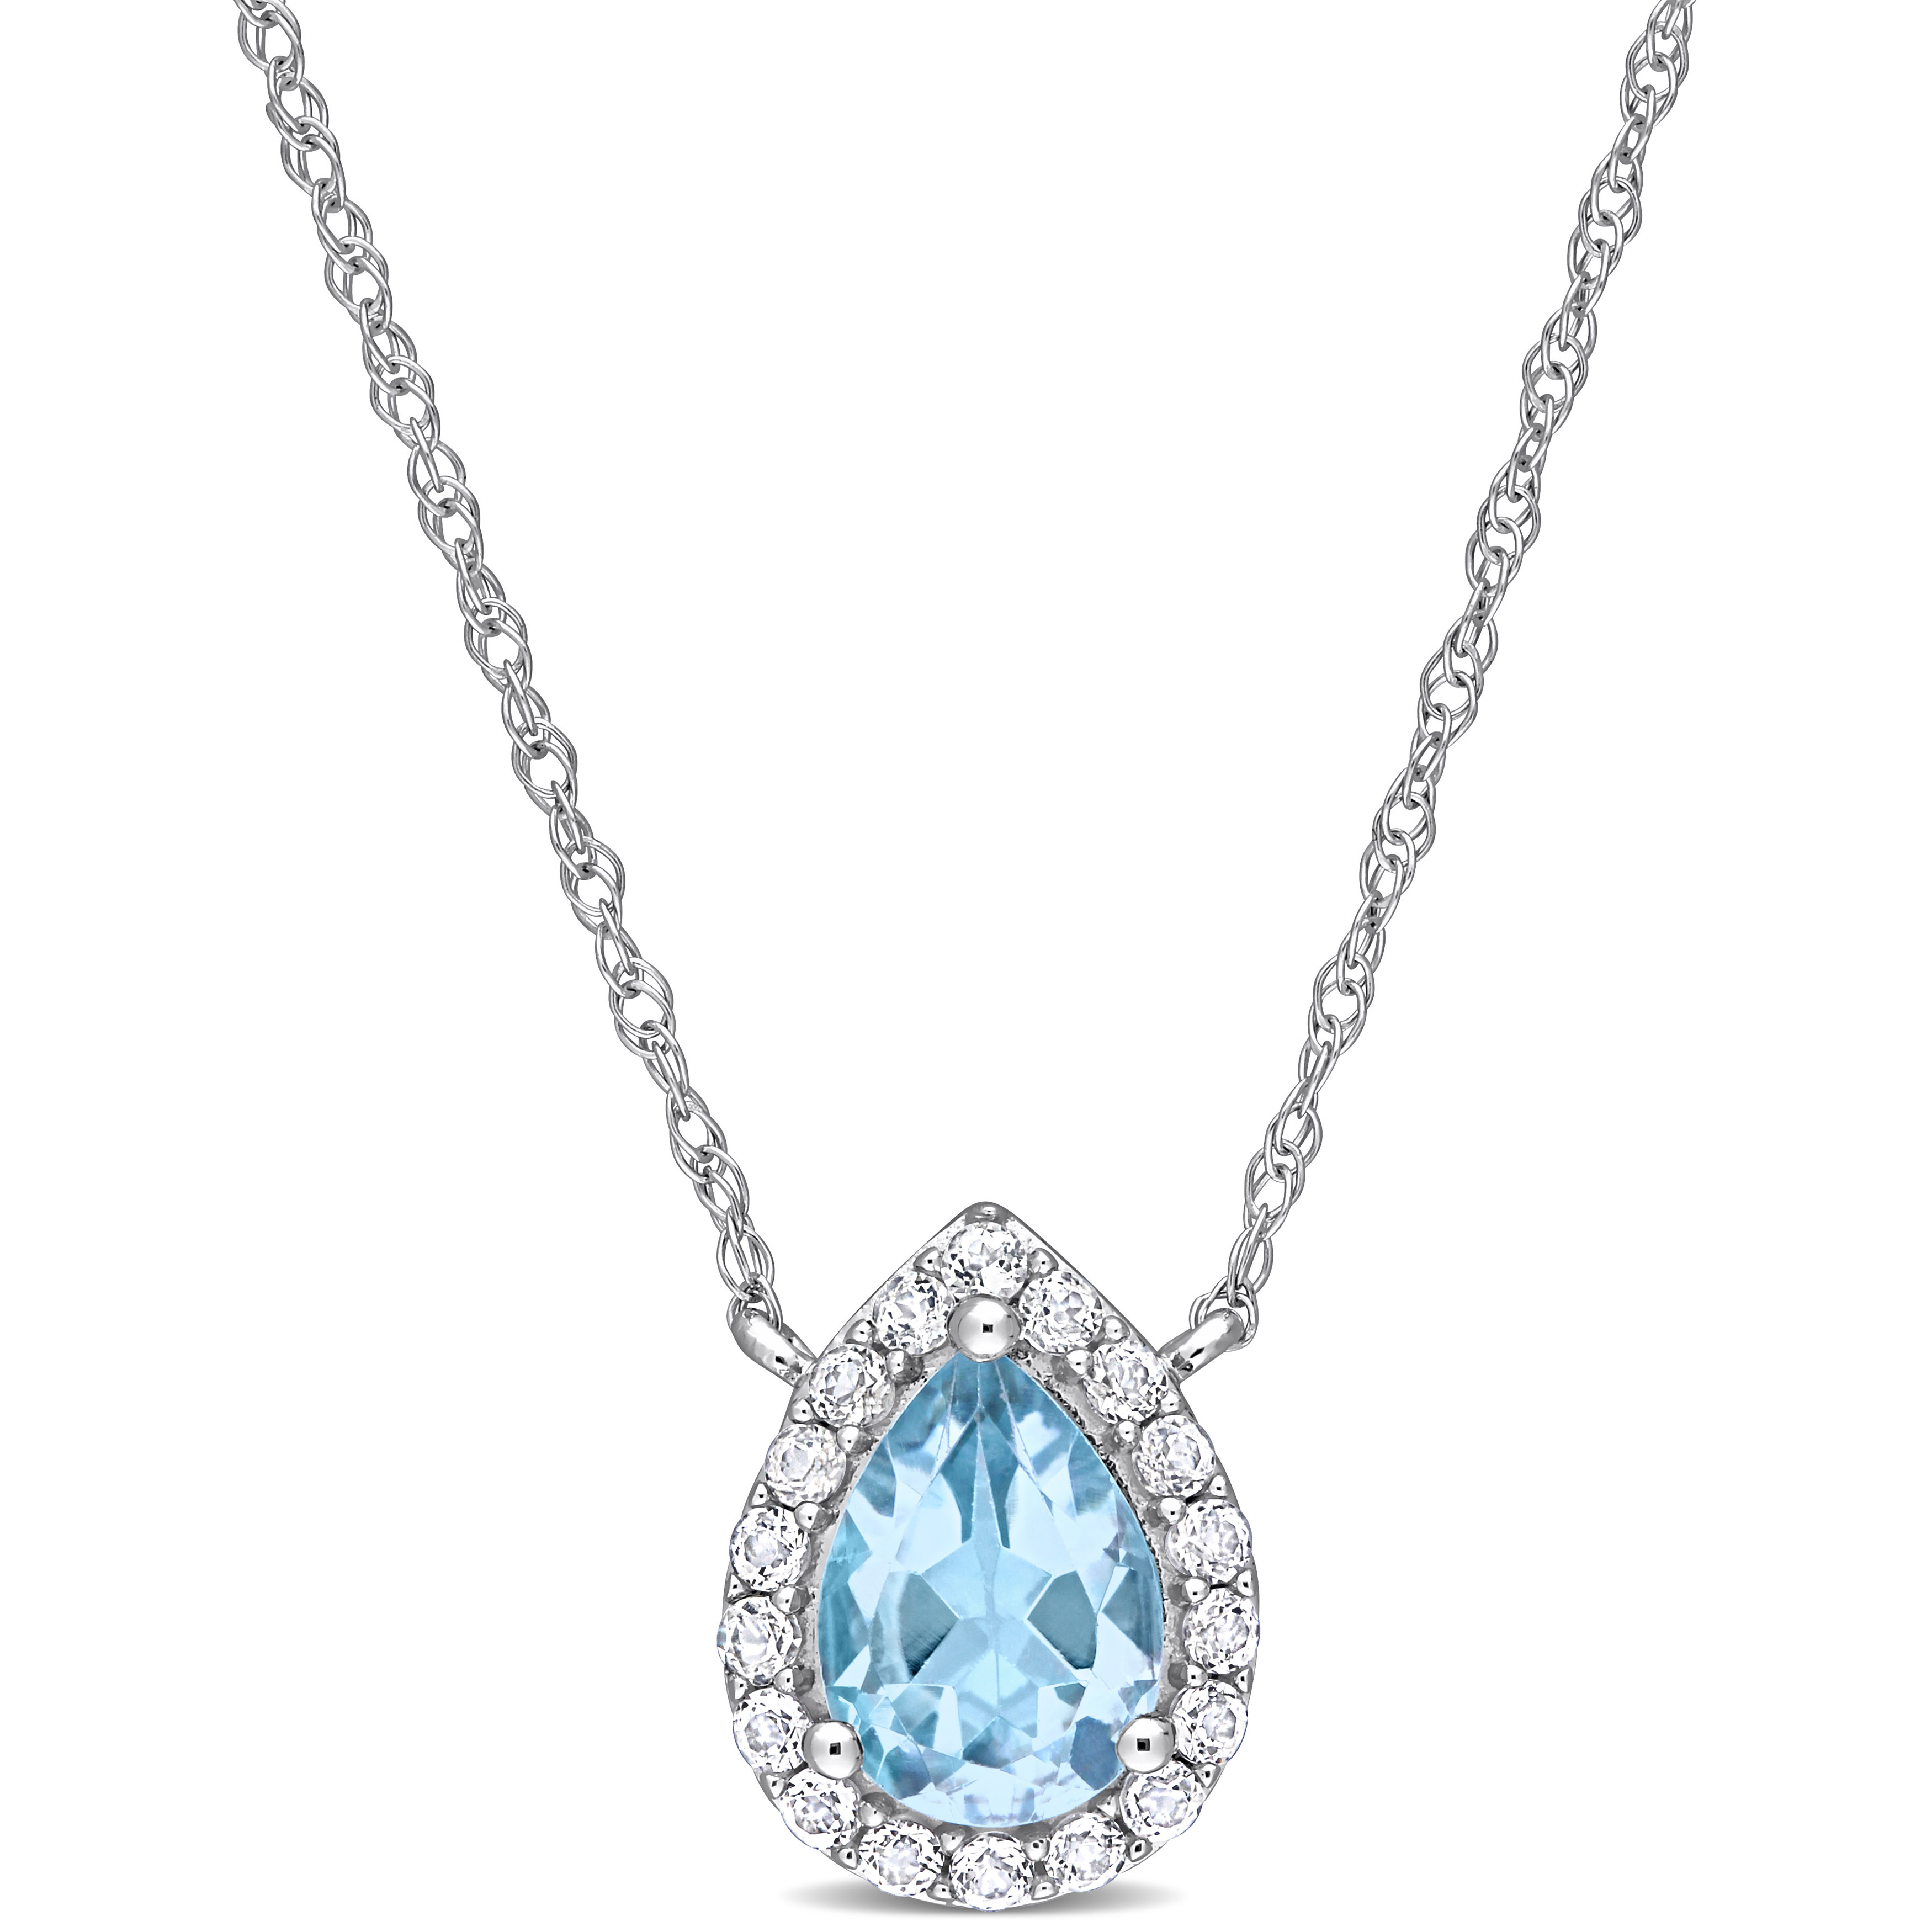 1 1/10 CT TGW Pear Sky Blue Topaz and White Topaz Halo Necklace in 10k White Gold - 17 in.